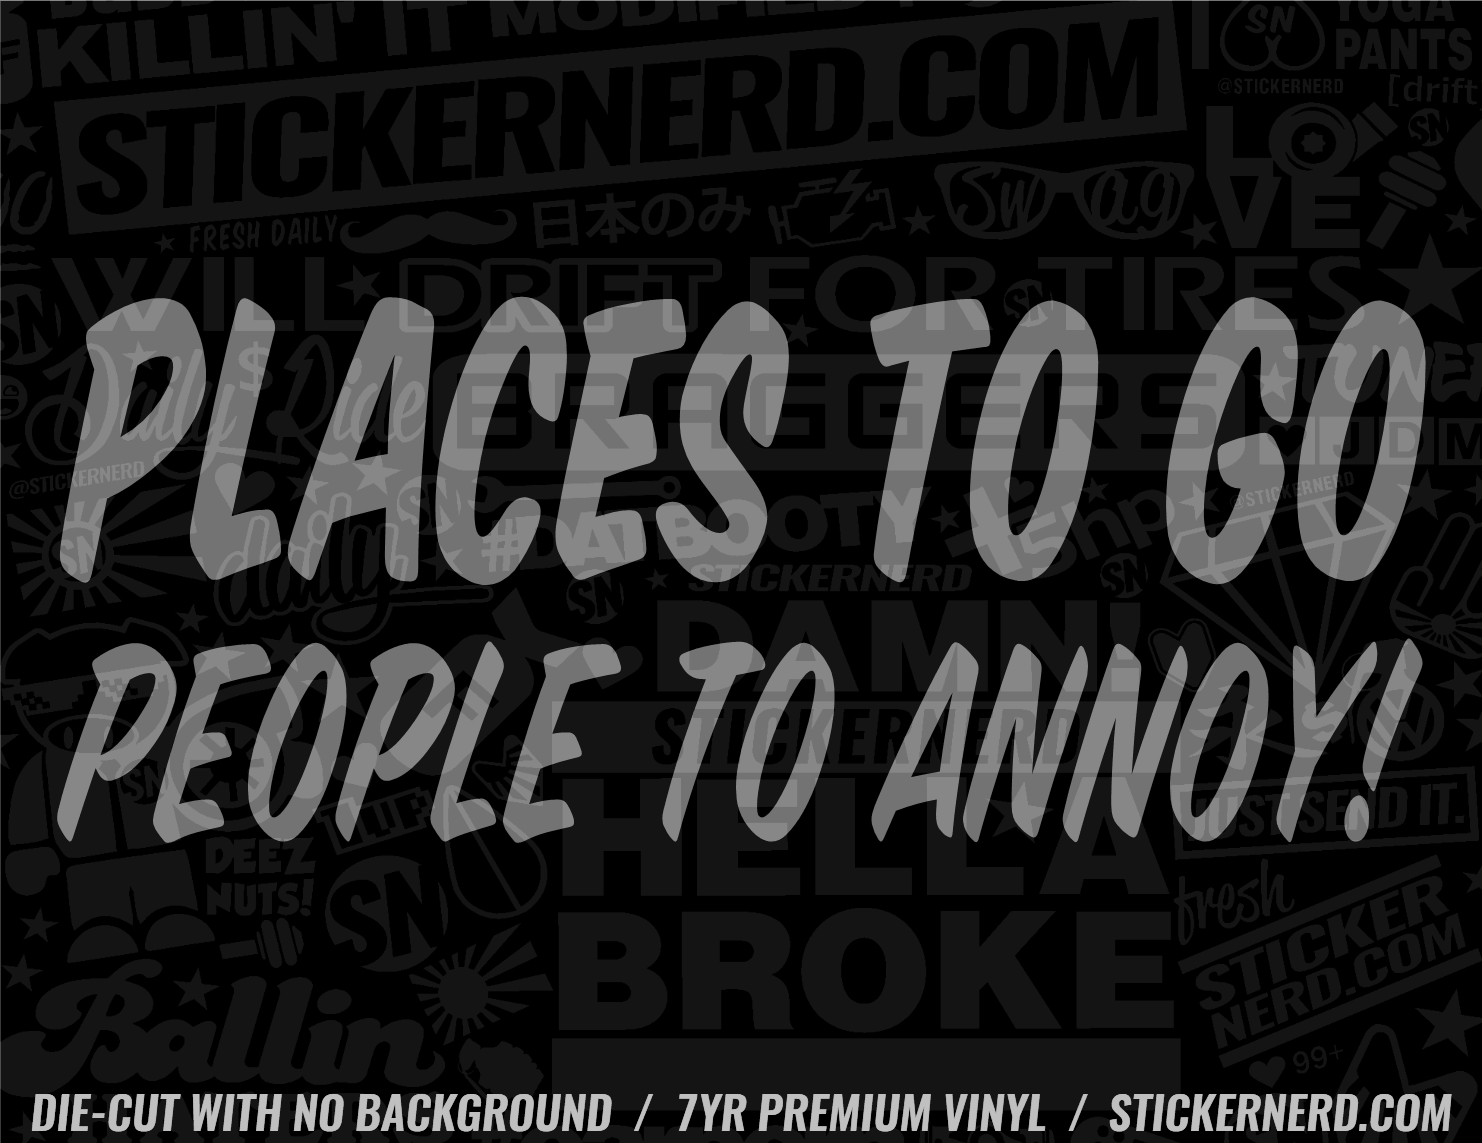 Places To Go People To Annoy Sticker - Decal - STICKERNERD.COM